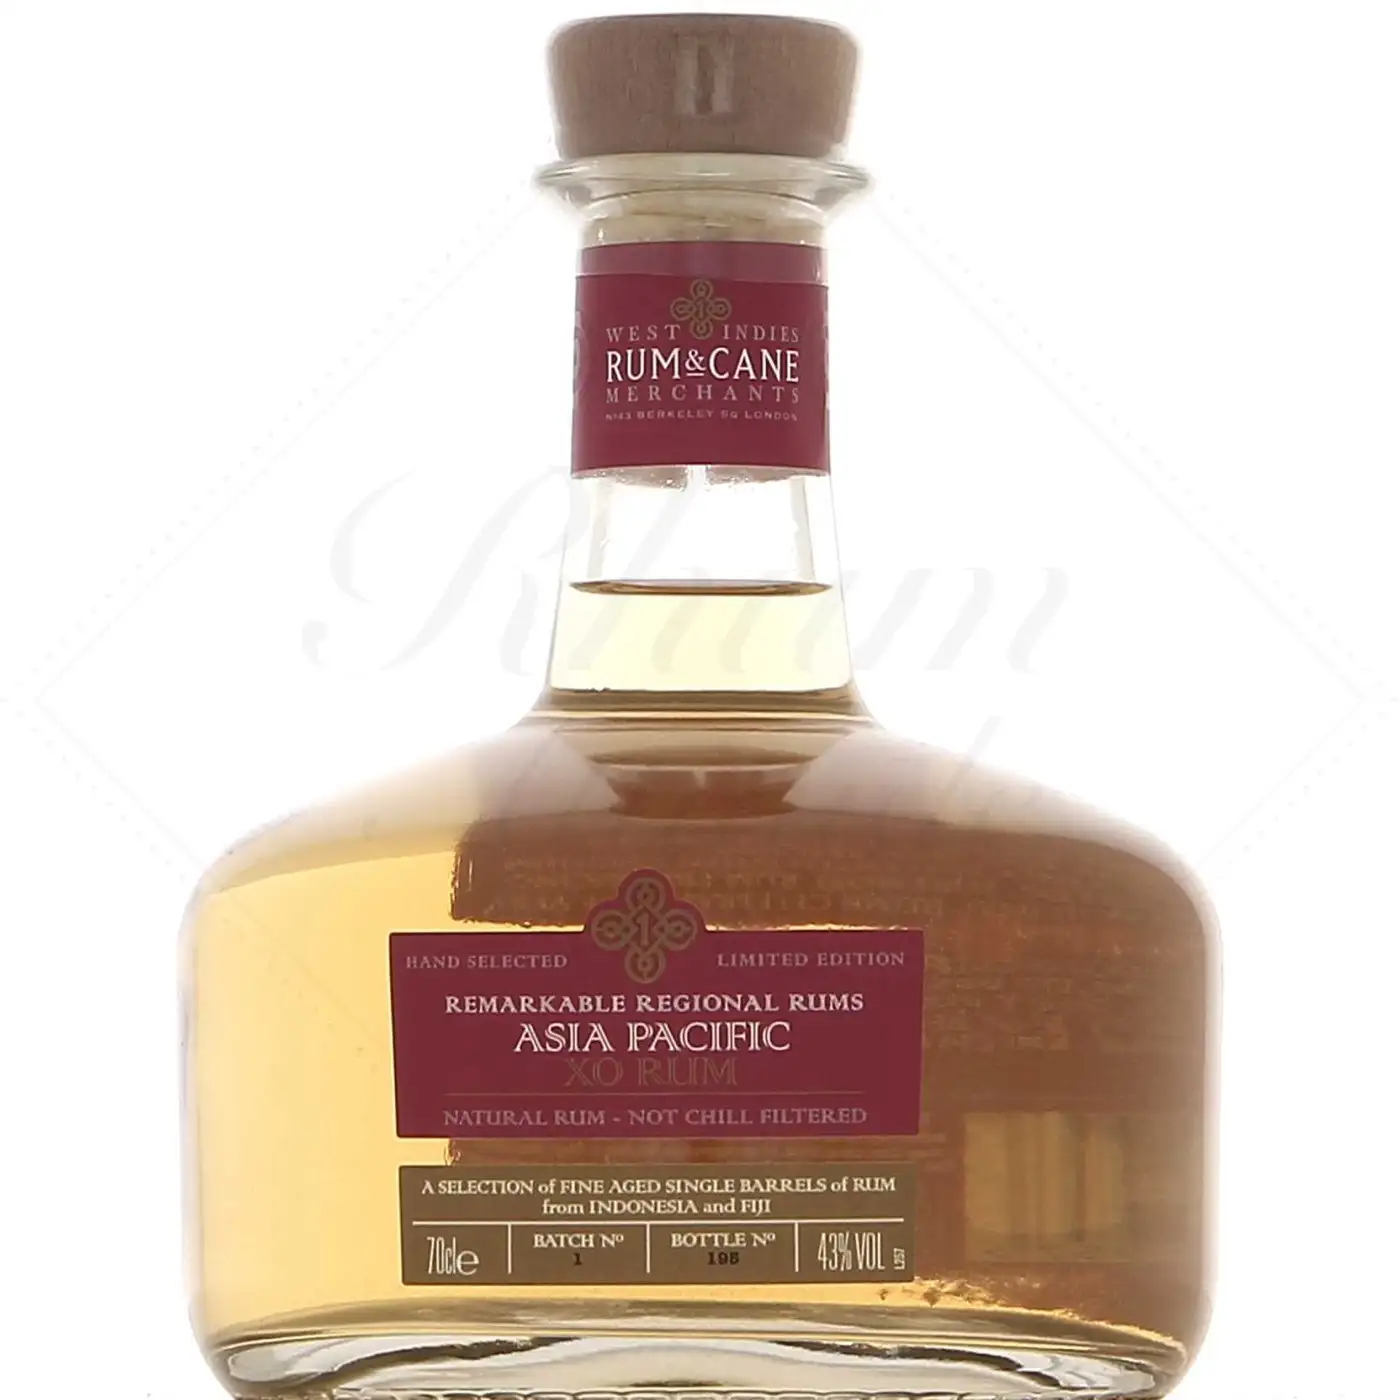 Image of the front of the bottle of the rum Rum & Cane Asia Pacific XO